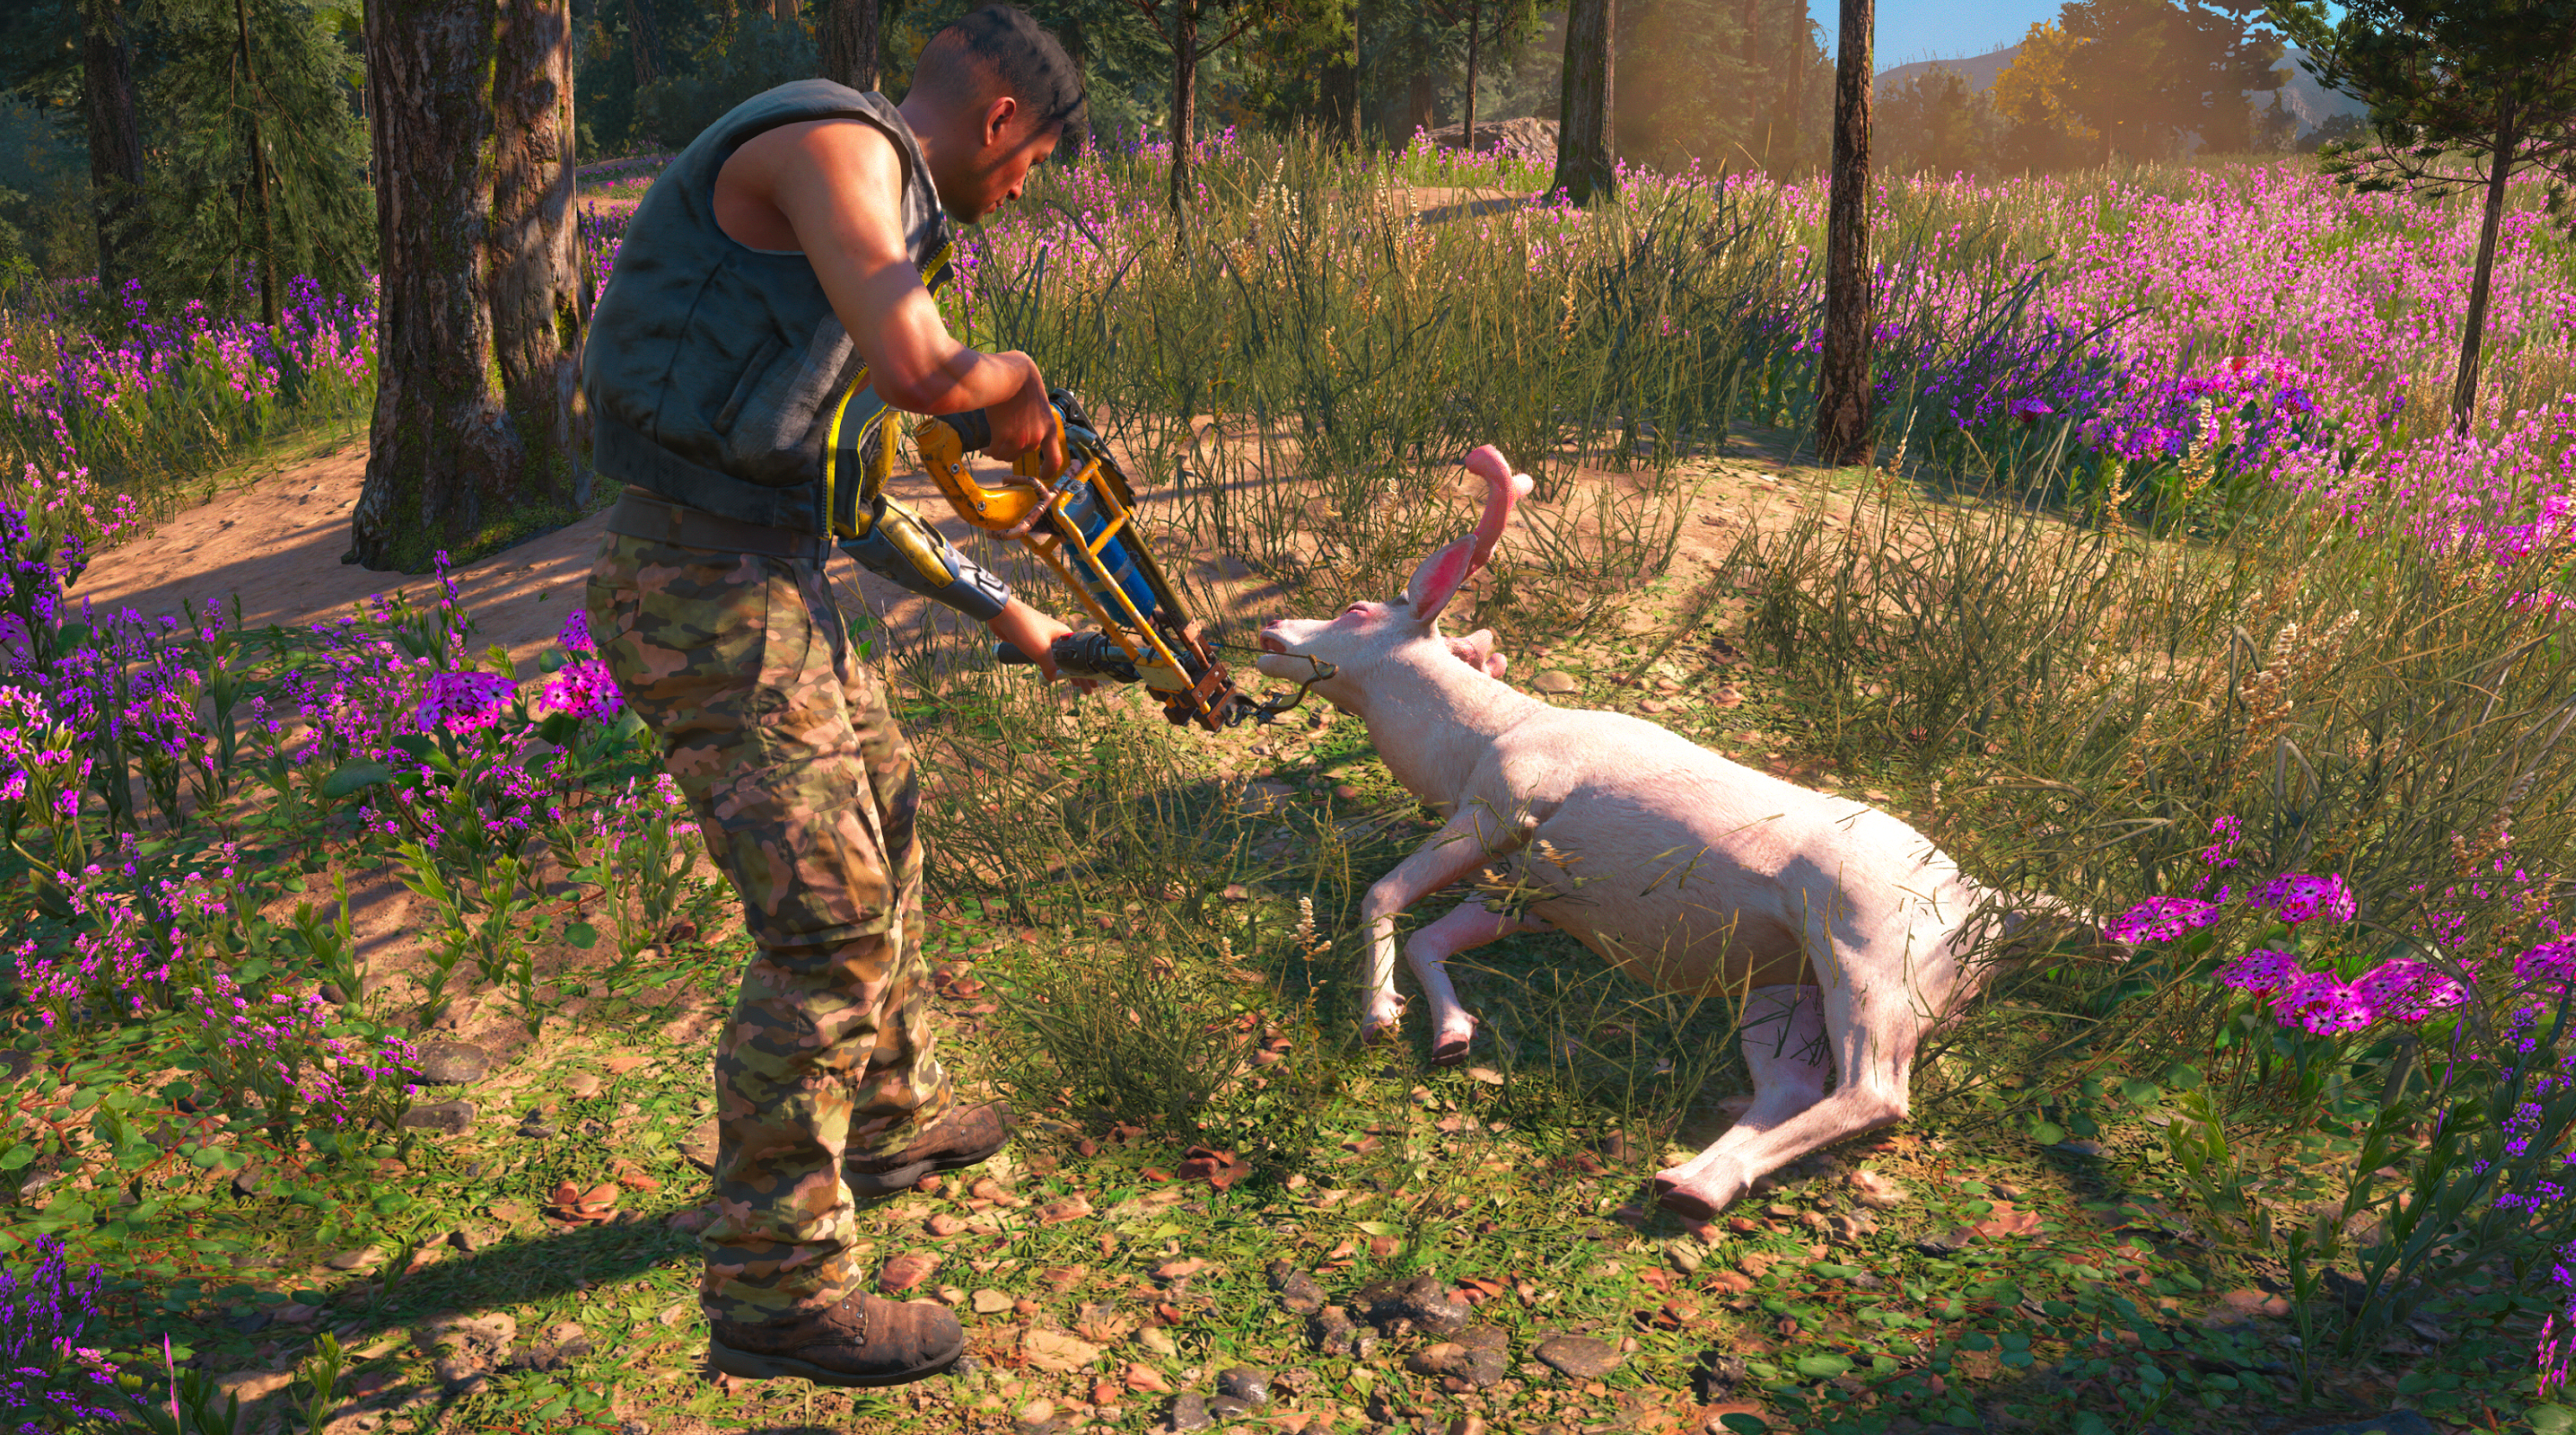 Image for Drop kickin’ a chicken: the strange history of animal abuse in Far Cry